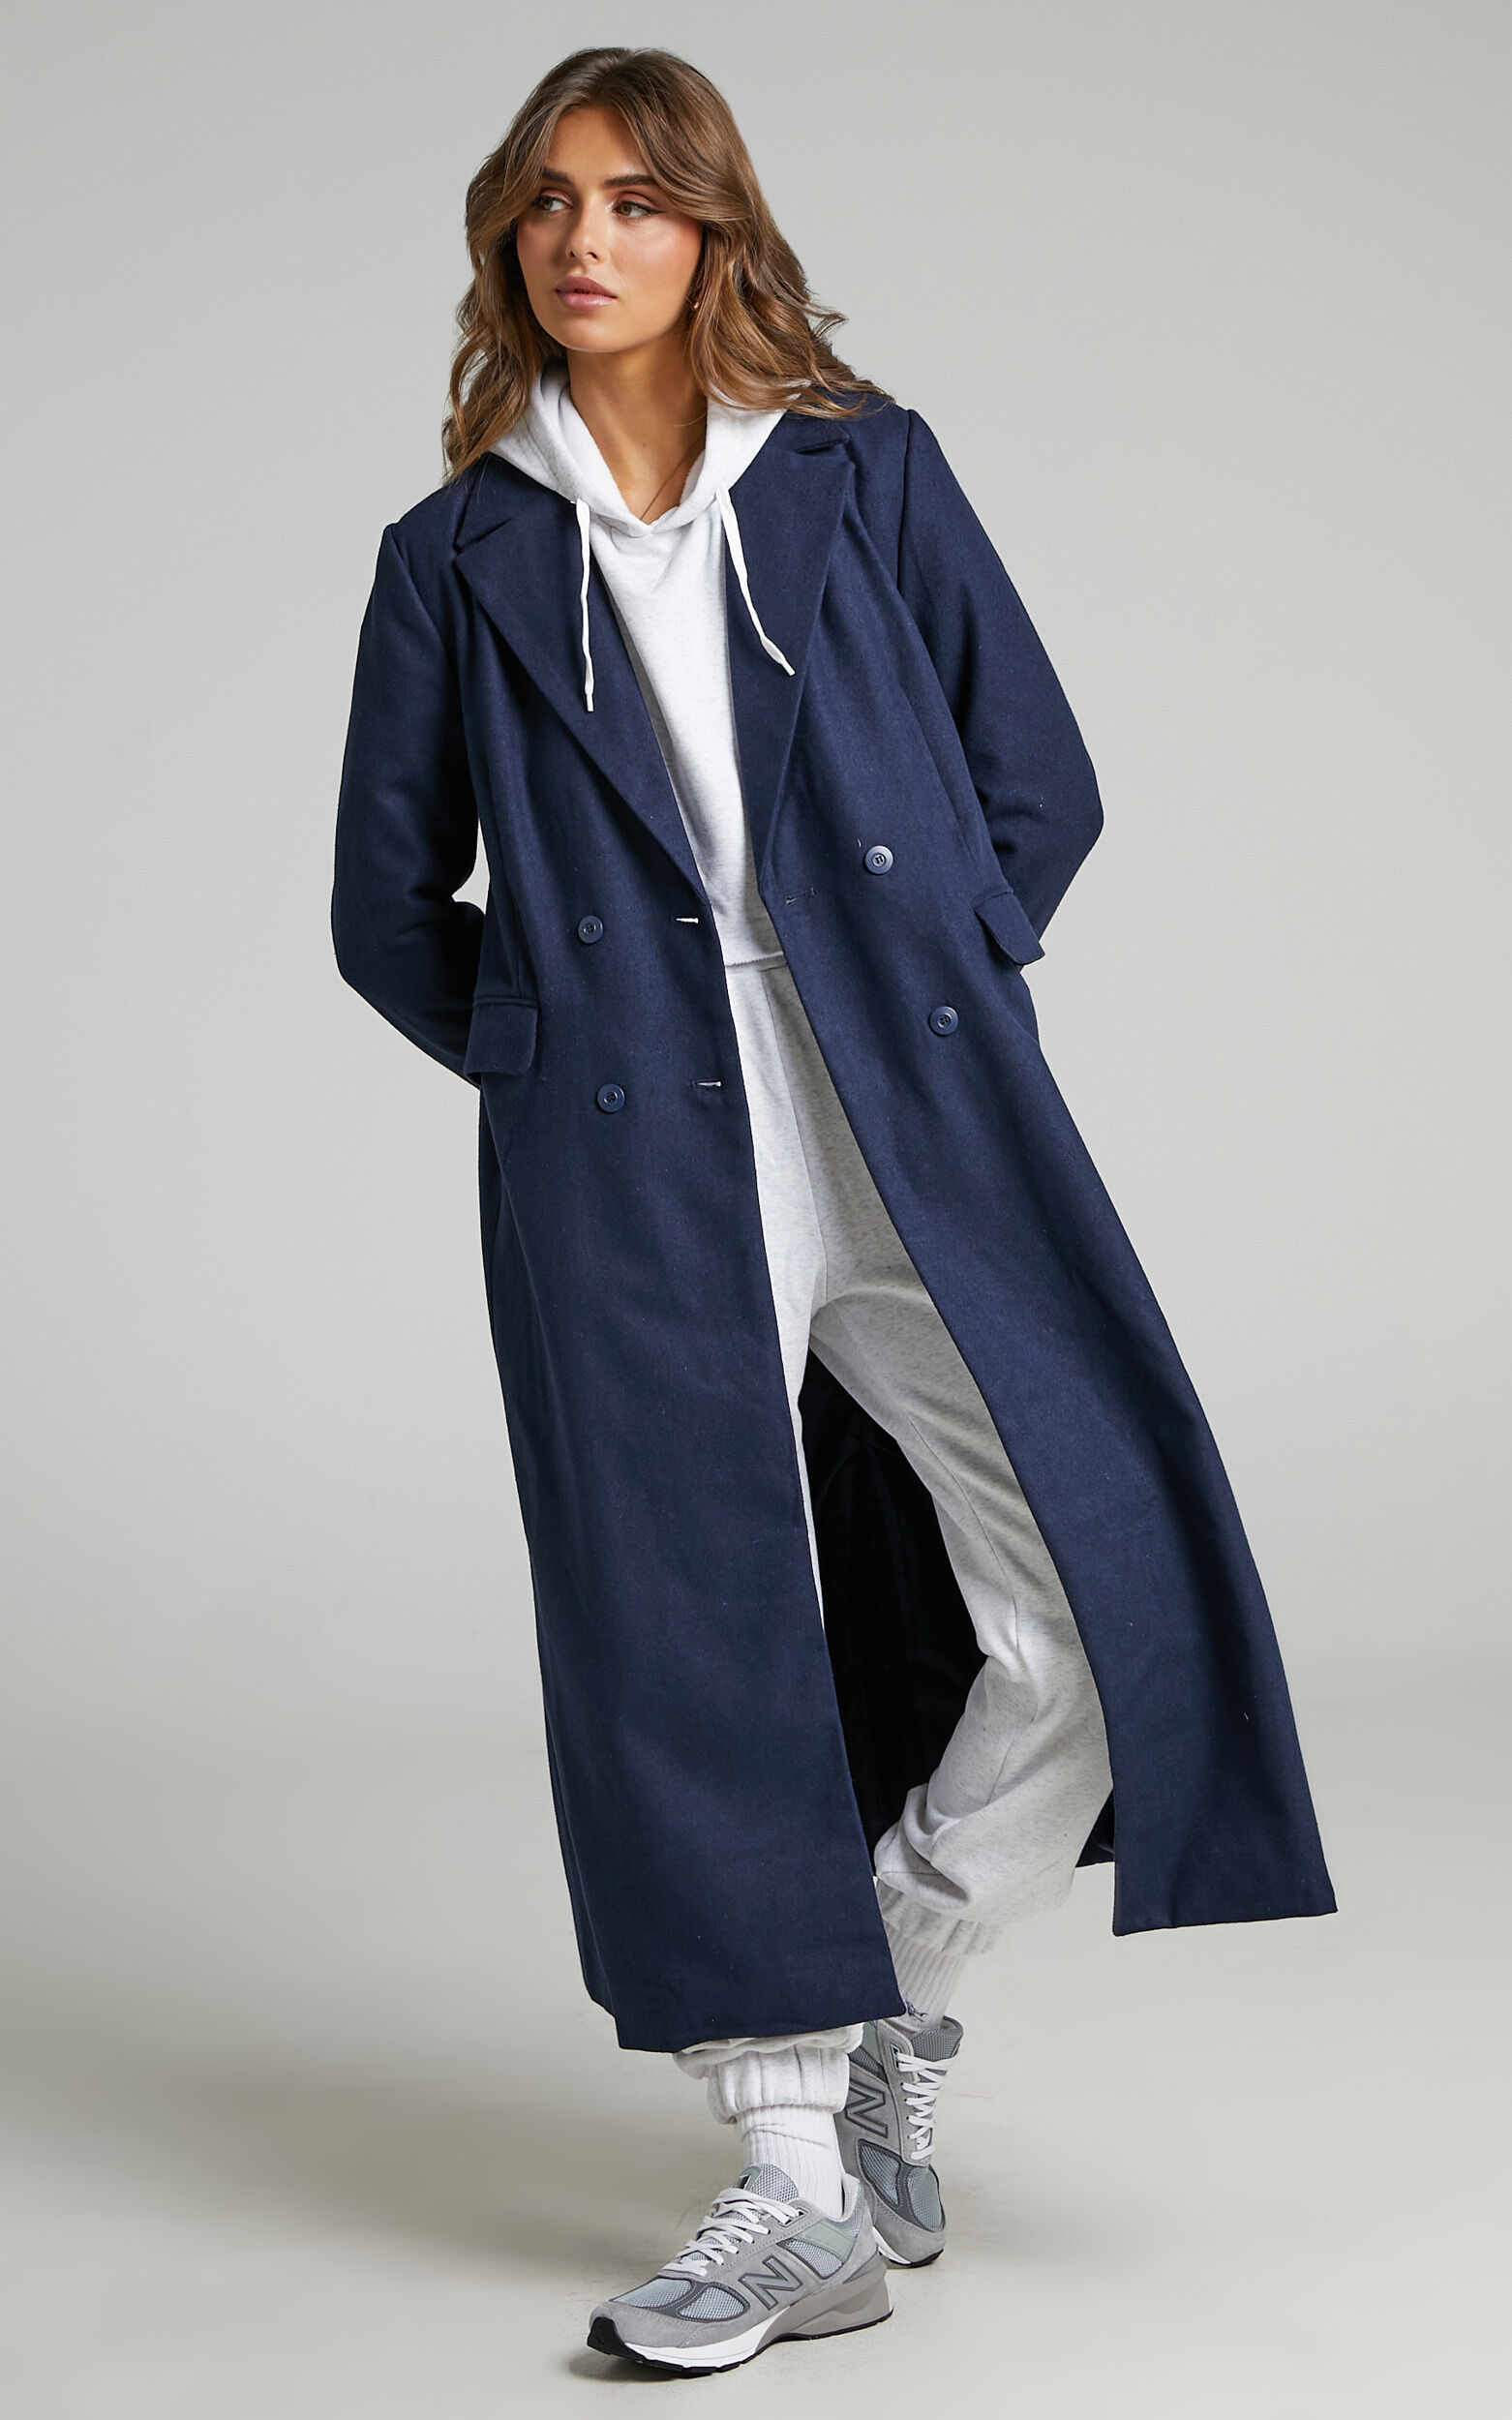 Lizah Button Up Trench Coat in Navy - 06, NVY1, super-hi-res image number null